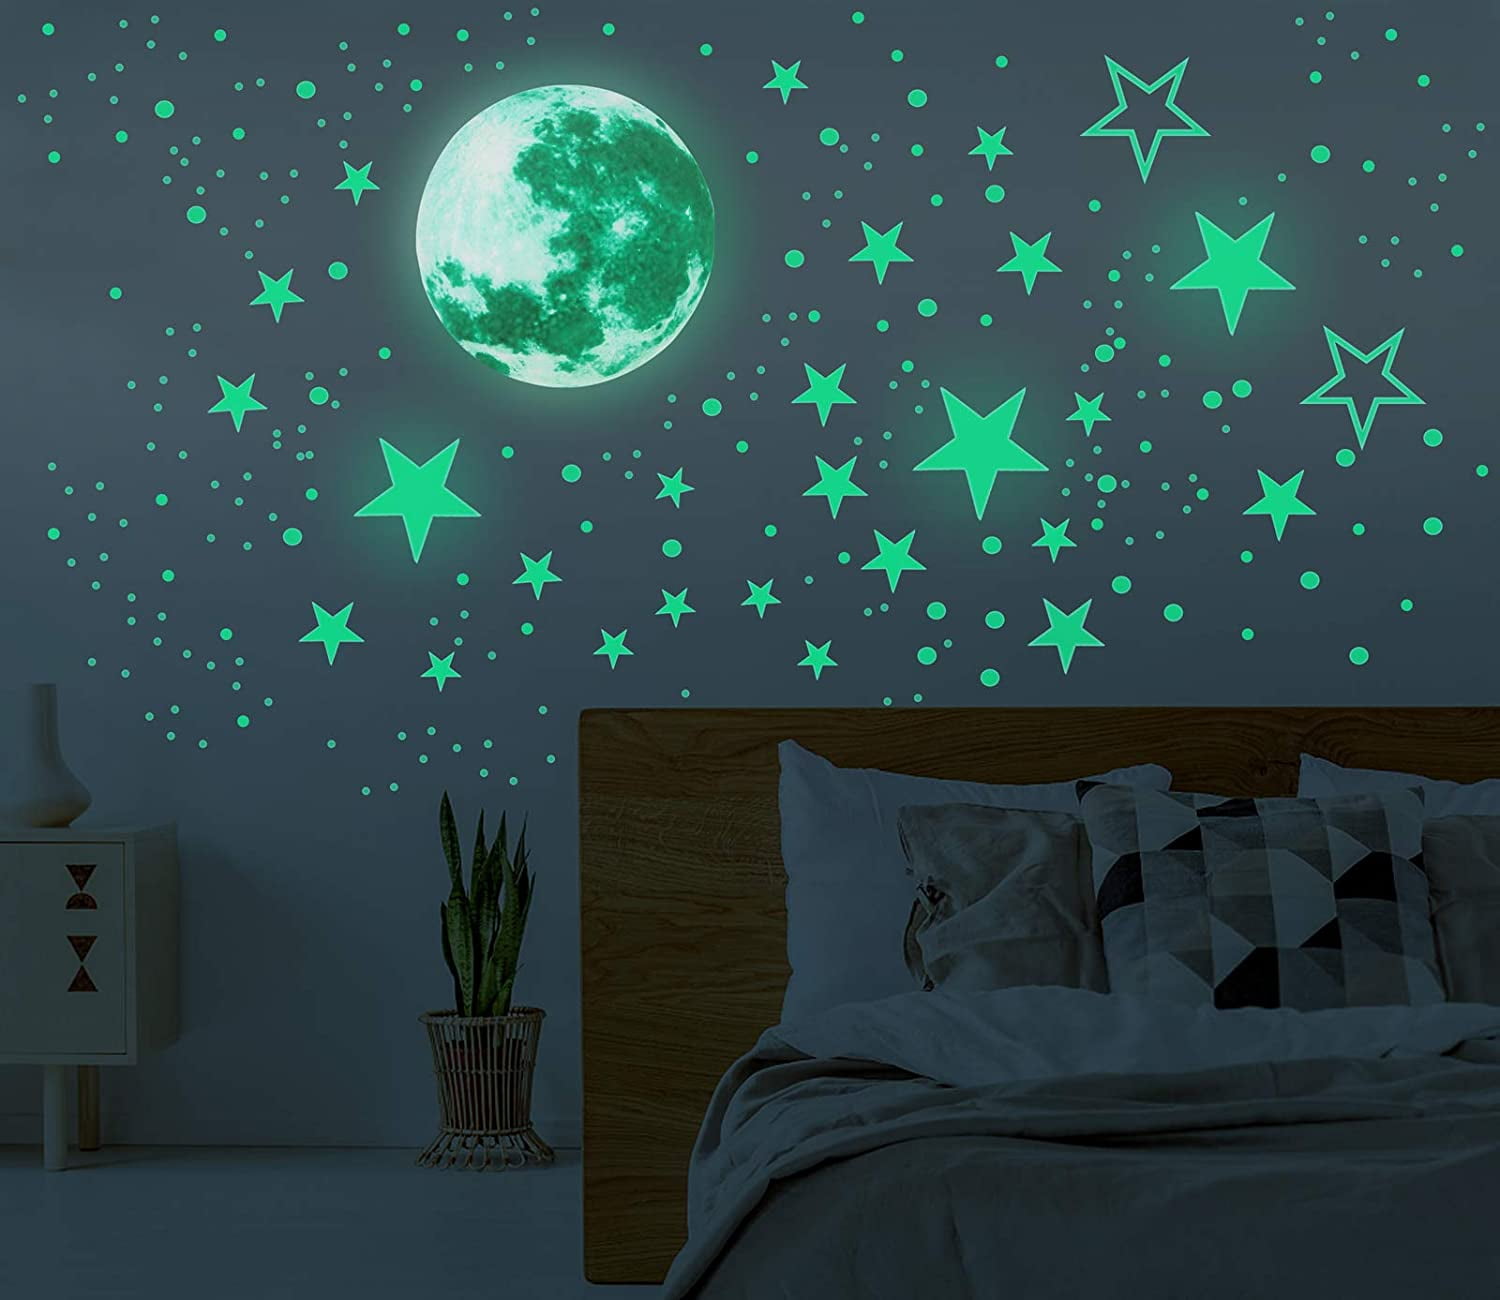 Glow in The Dark Moon and Stars Wall Stickers, 437PCS Adhesive Room Decor,  Ceiling Art Stickers for Starry Sky at Night, Removable Wall Stickers,  Great for Kids' Bedroom 